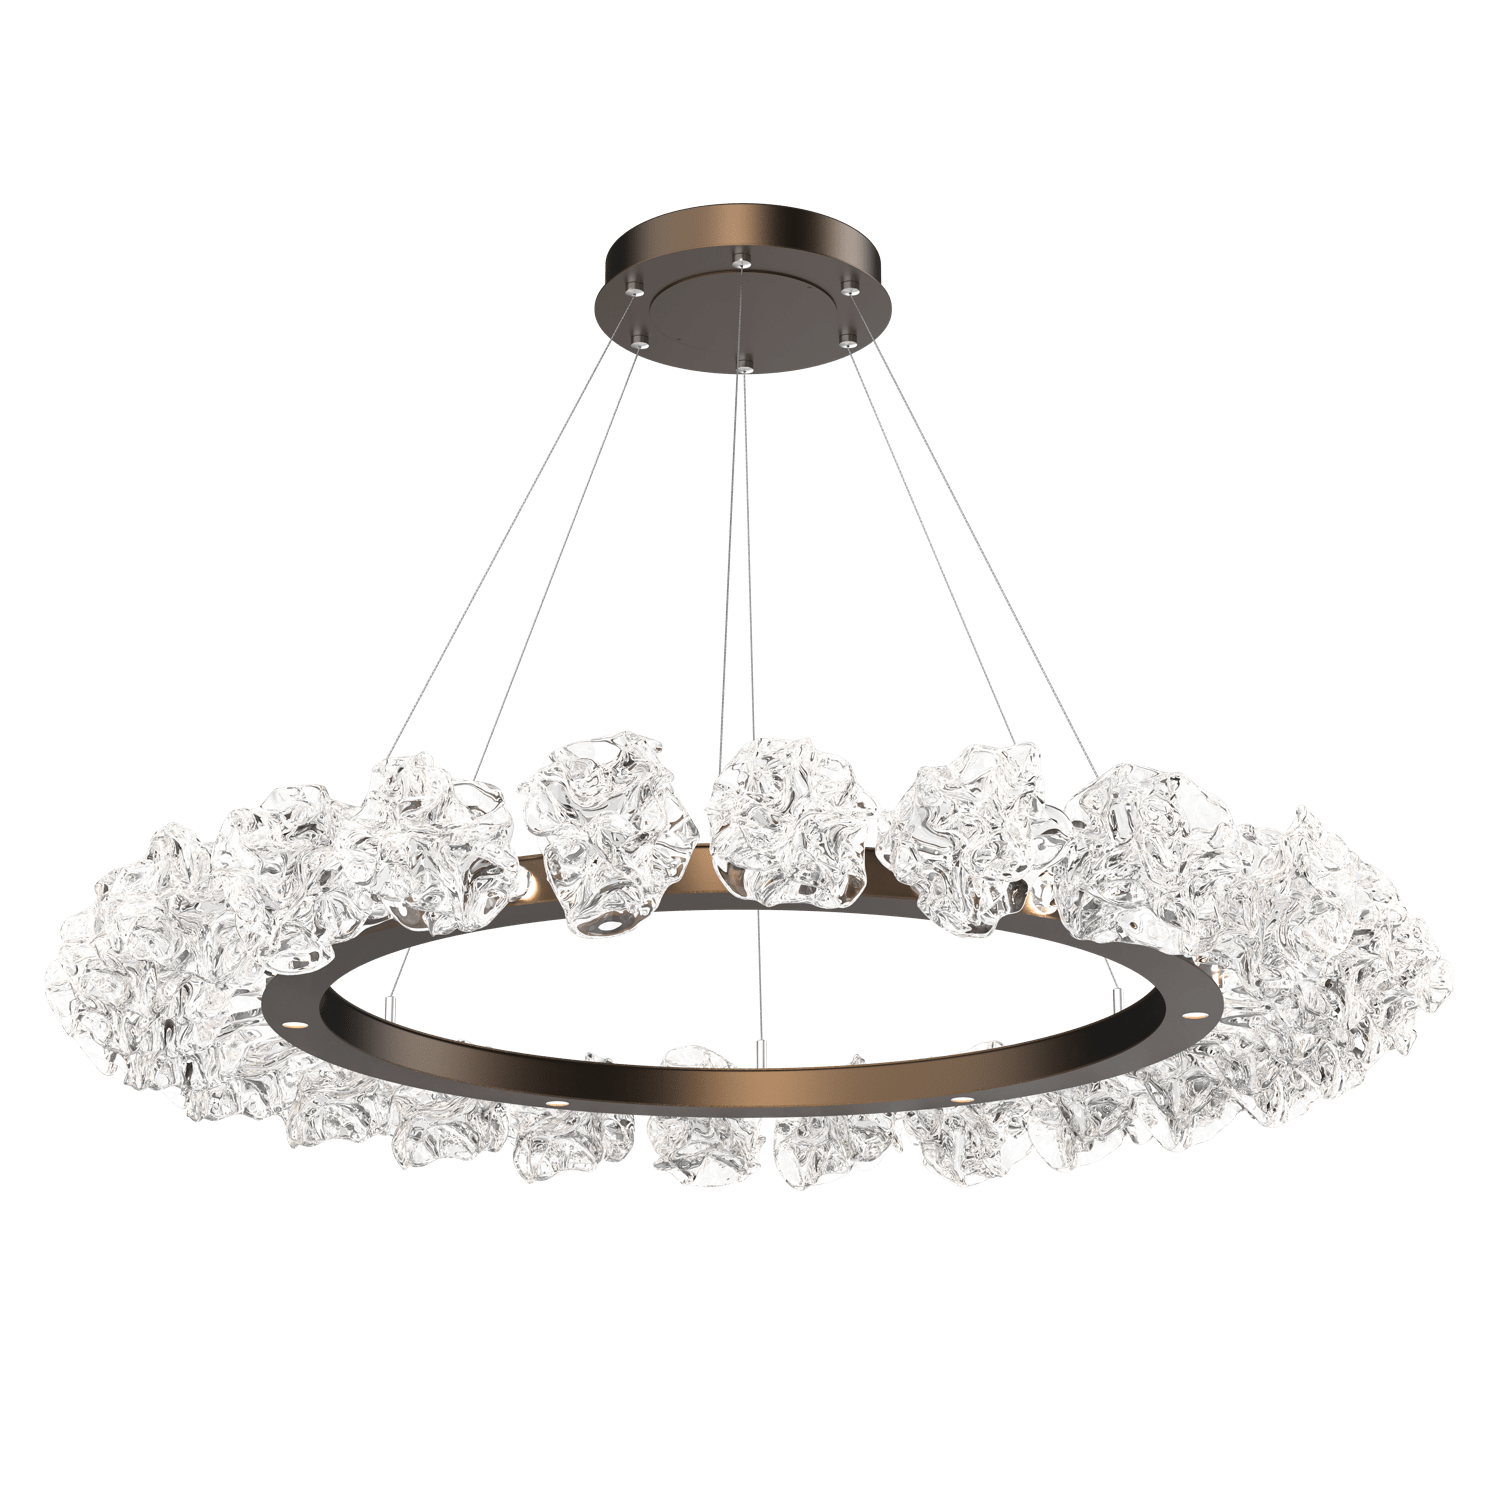 CHB0059-50-FB-Hammerton-Studio-Blossom-50-inch-radial-ring-chandelier-with-flat-bronze-finish-and-clear-handblown-crystal-glass-shades-and-LED-lamping